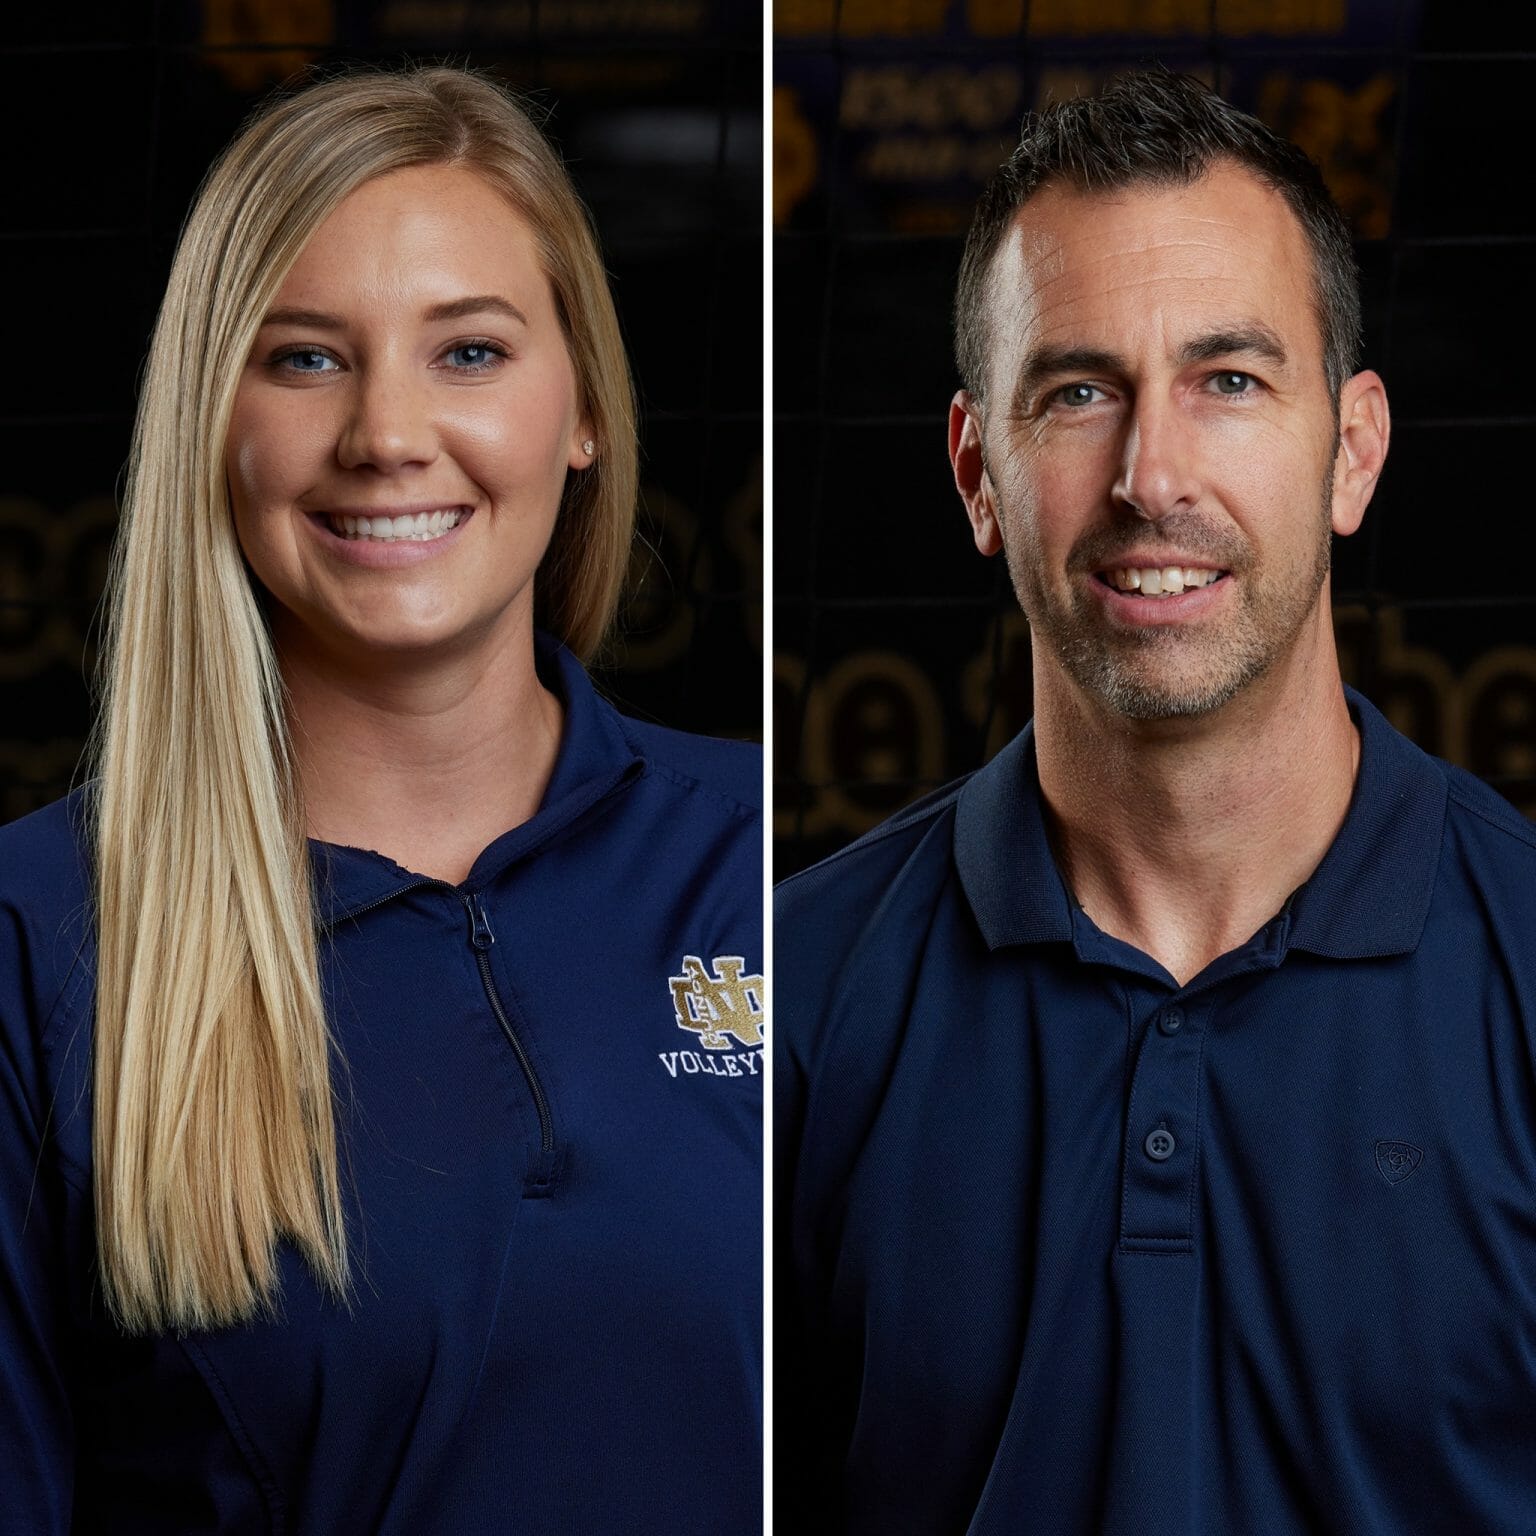 QND Volleyball Coaches